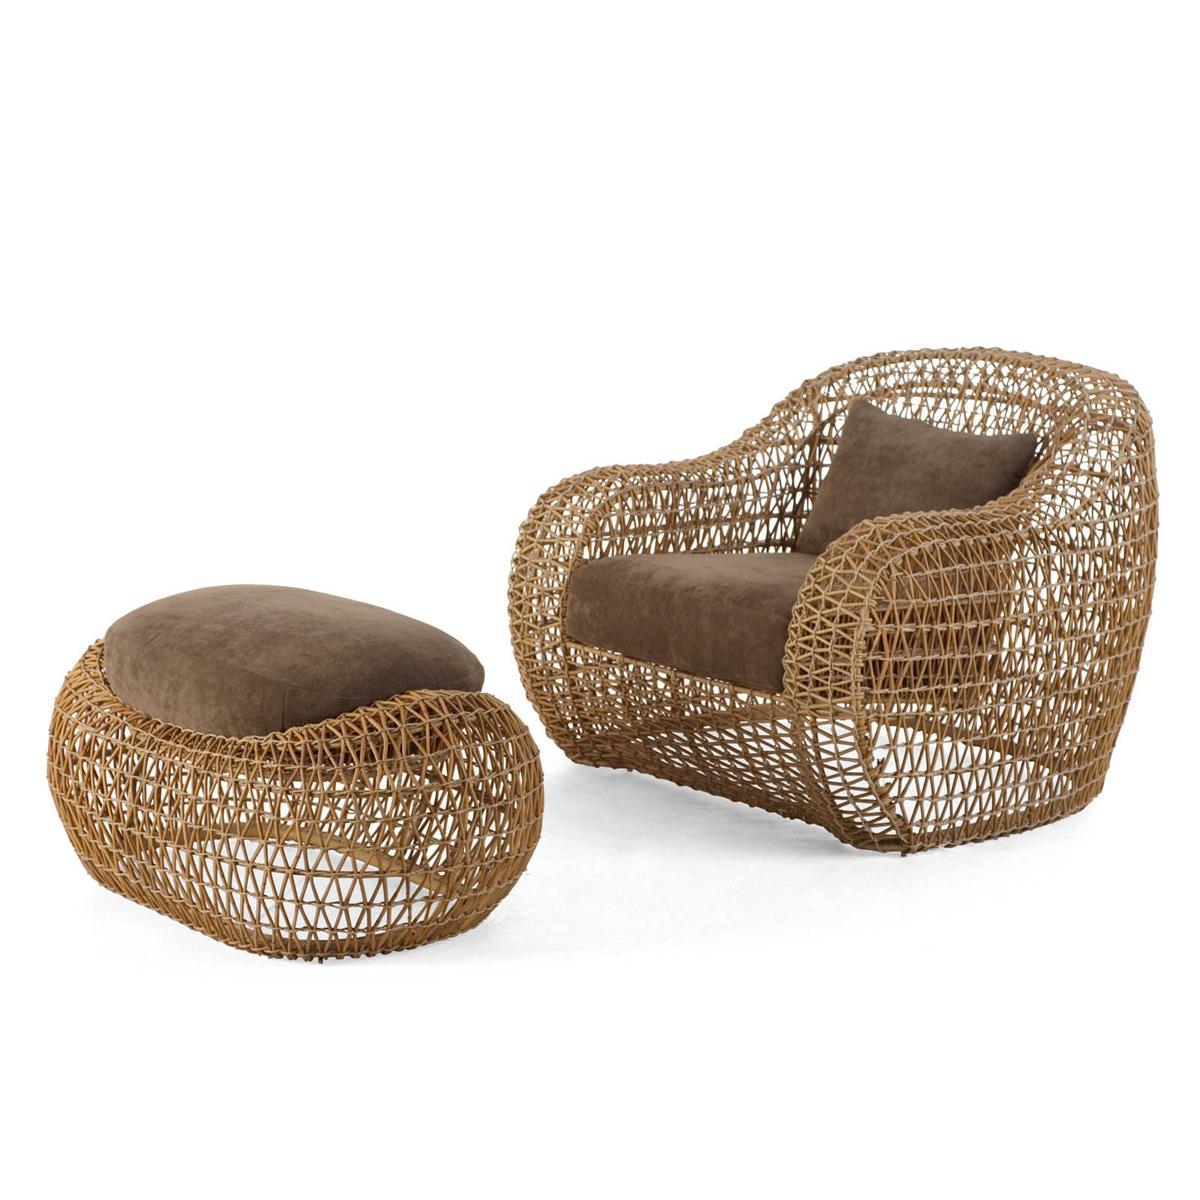 Philippine Lombok Stool or Footrest Indoor or Outdoor For Sale